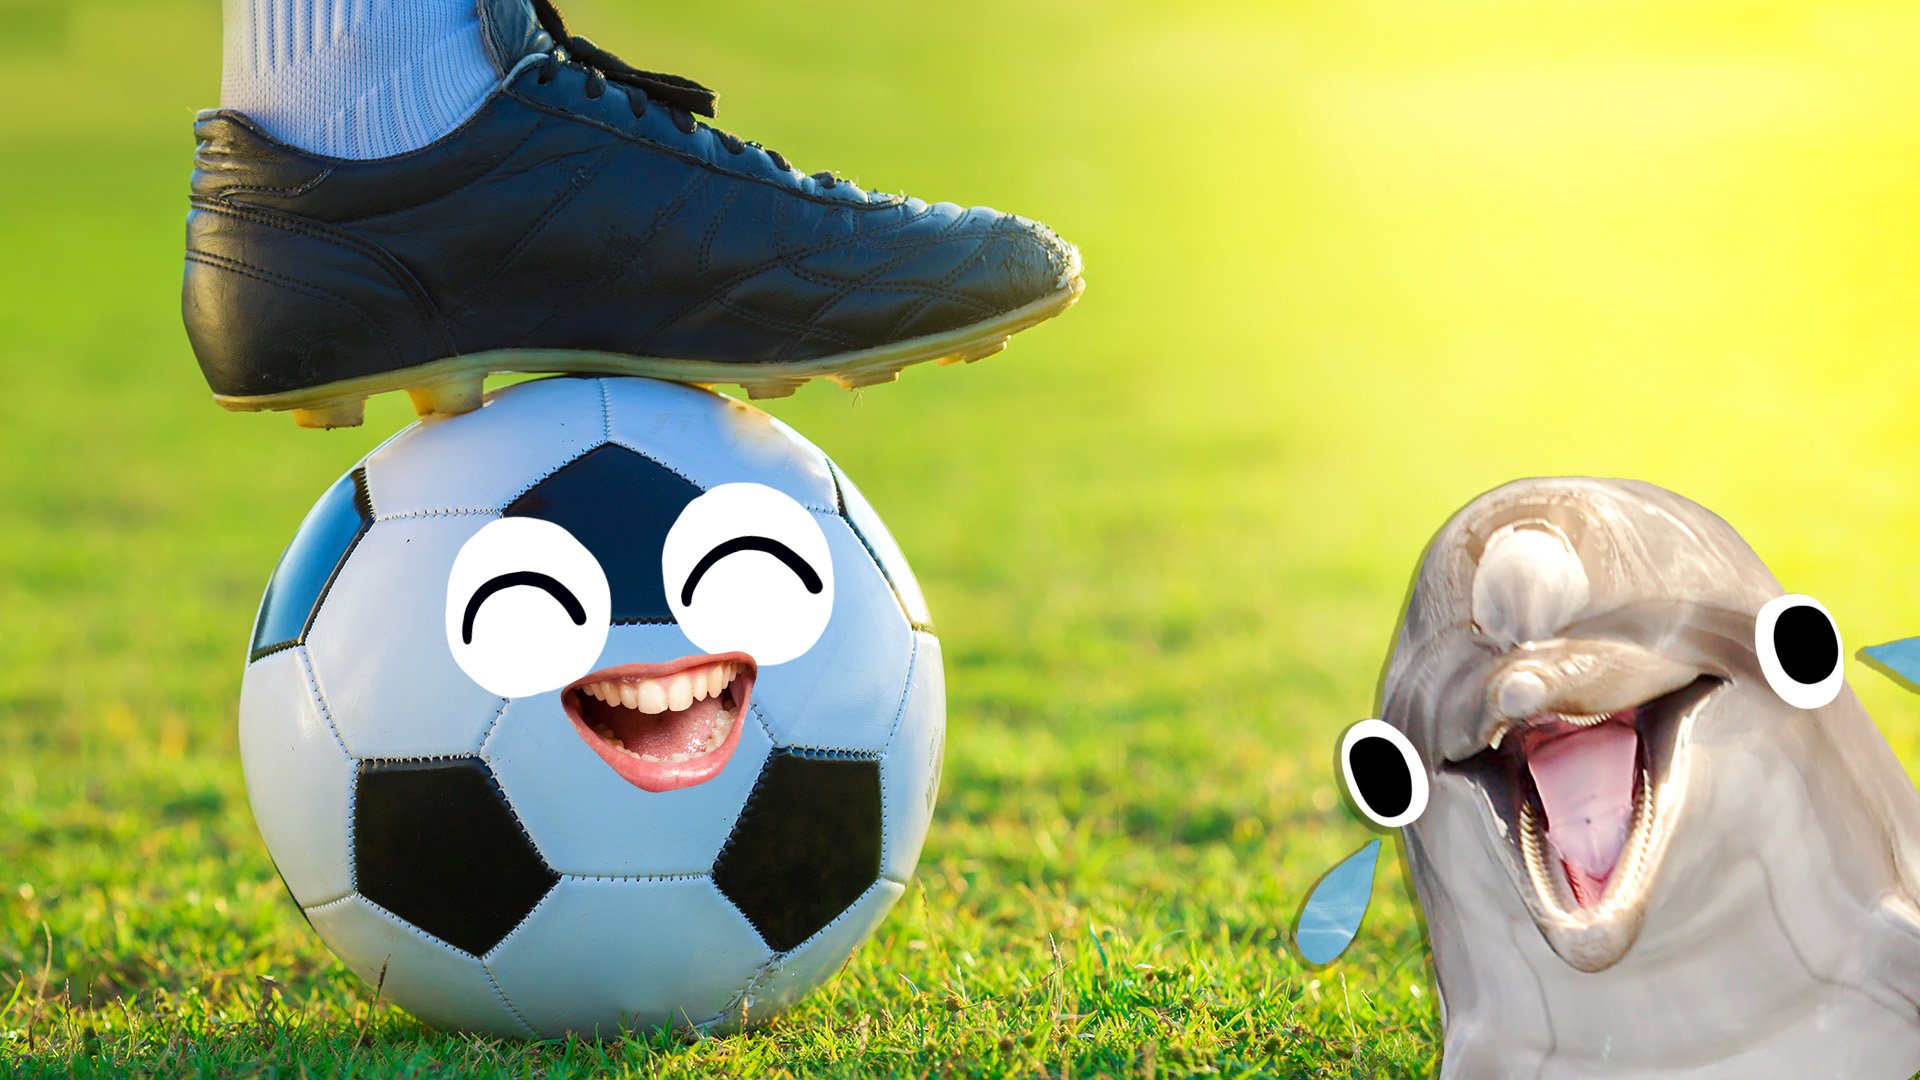 A footballer's foot resting on a ball next to a laughing dolphin